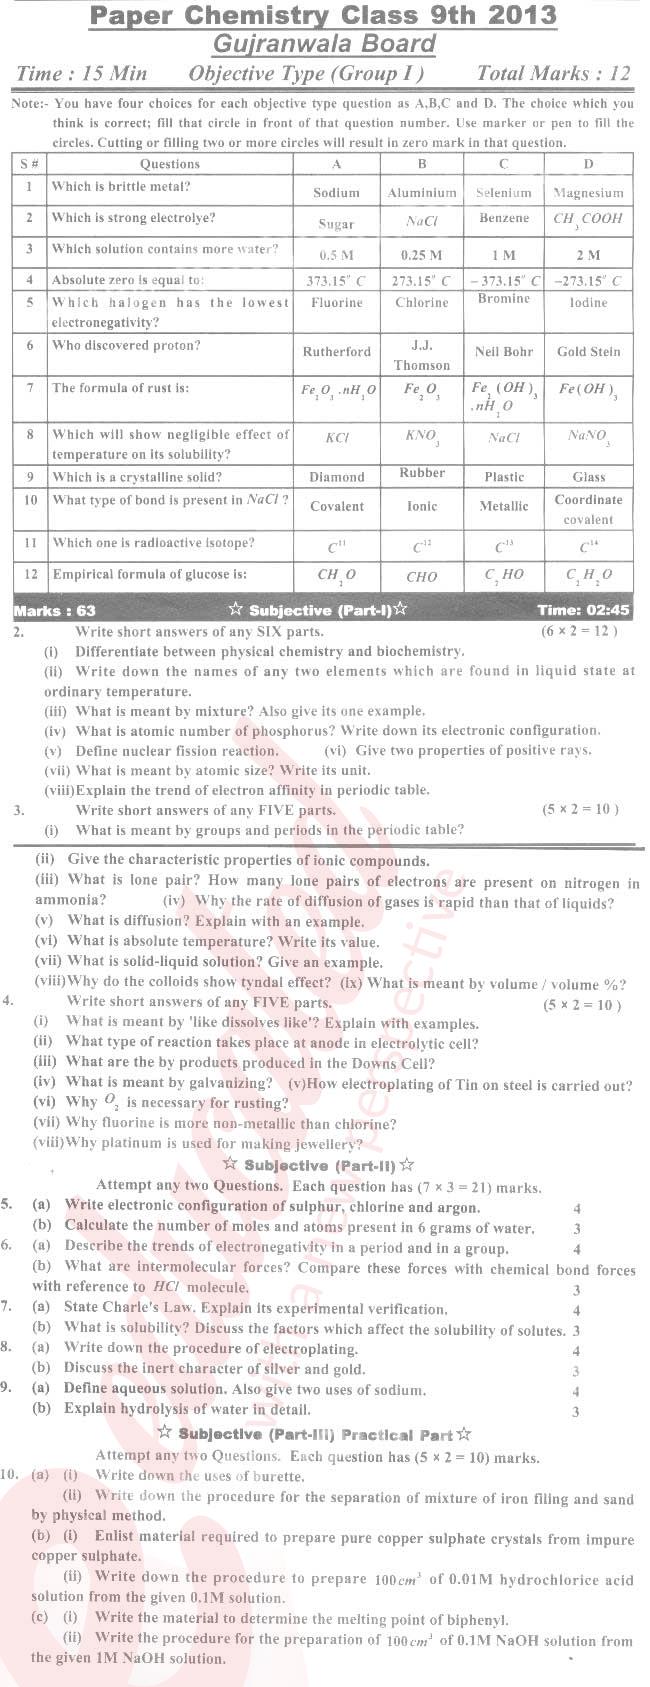 Chemistry 9th English Medium Past Paper Group 1 BISE Gujranwala 2013